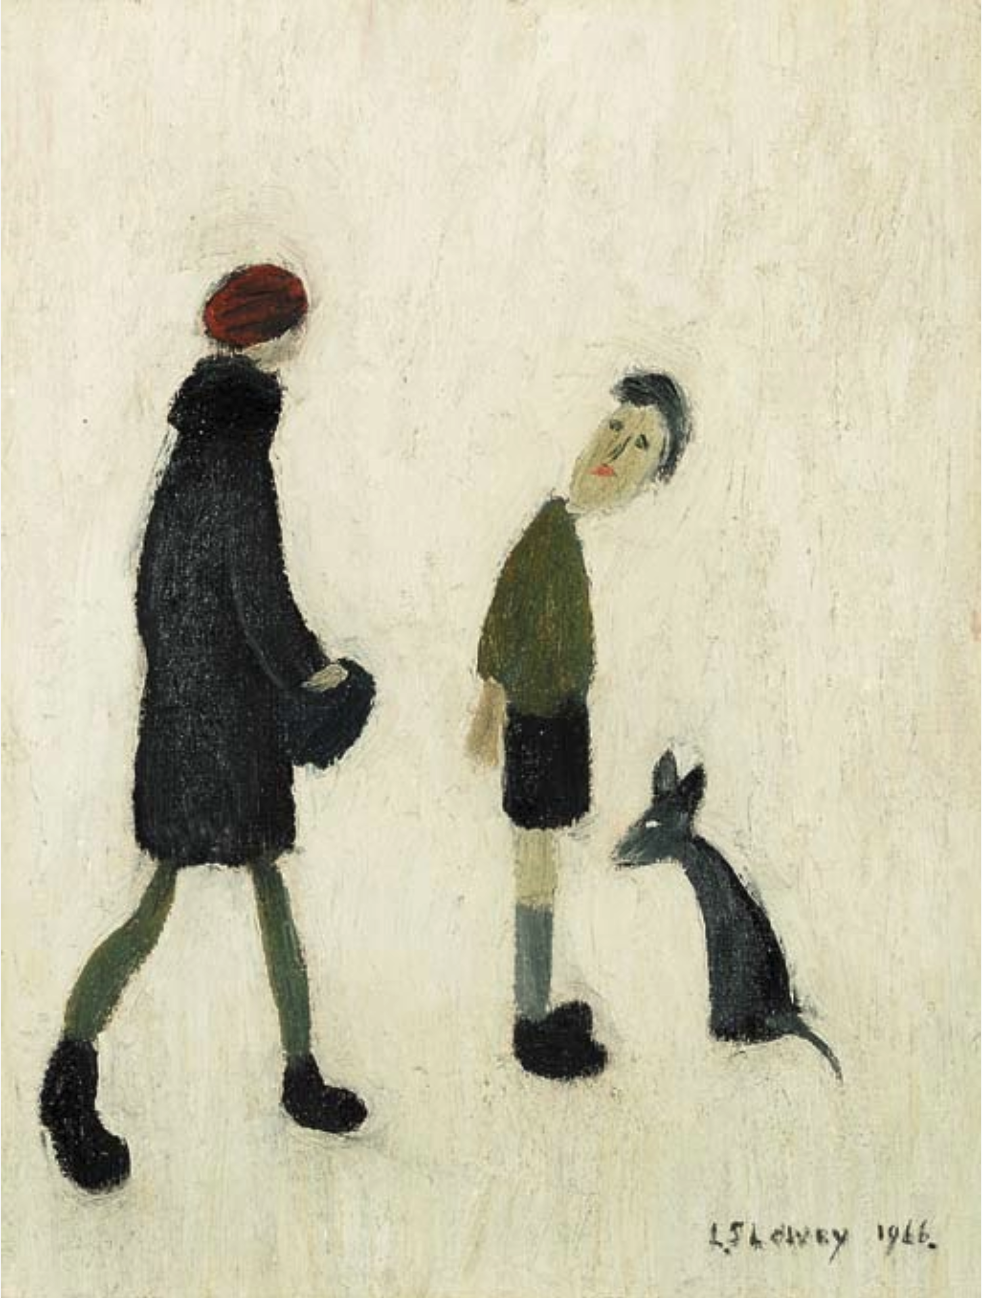 Figures with a dog (1966) by Laurence Stephen Lowry (1887 - 1976), English artist.